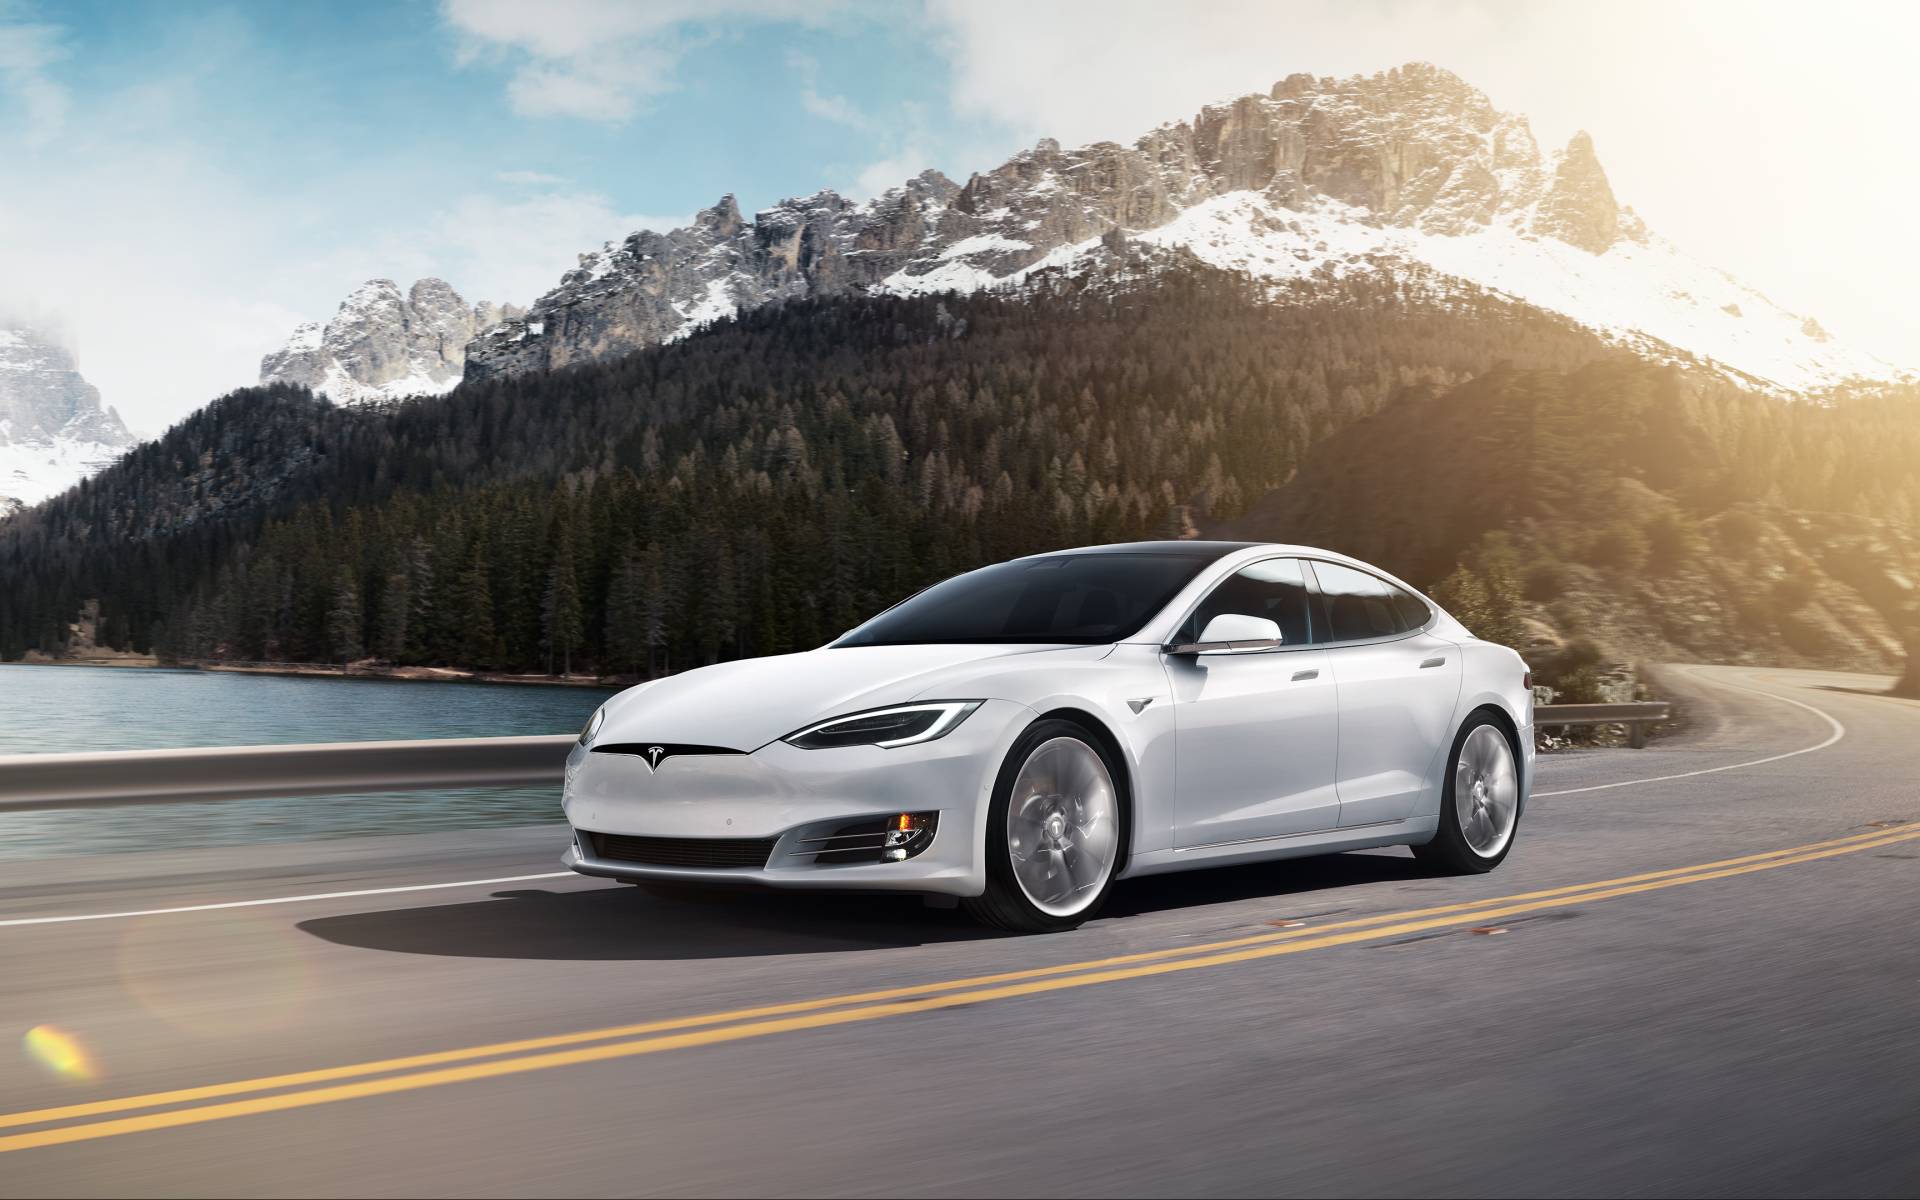 spannend de sneeuw Ruilhandel 2019 Tesla Model S - News, reviews, picture galleries and videos - The Car  Guide